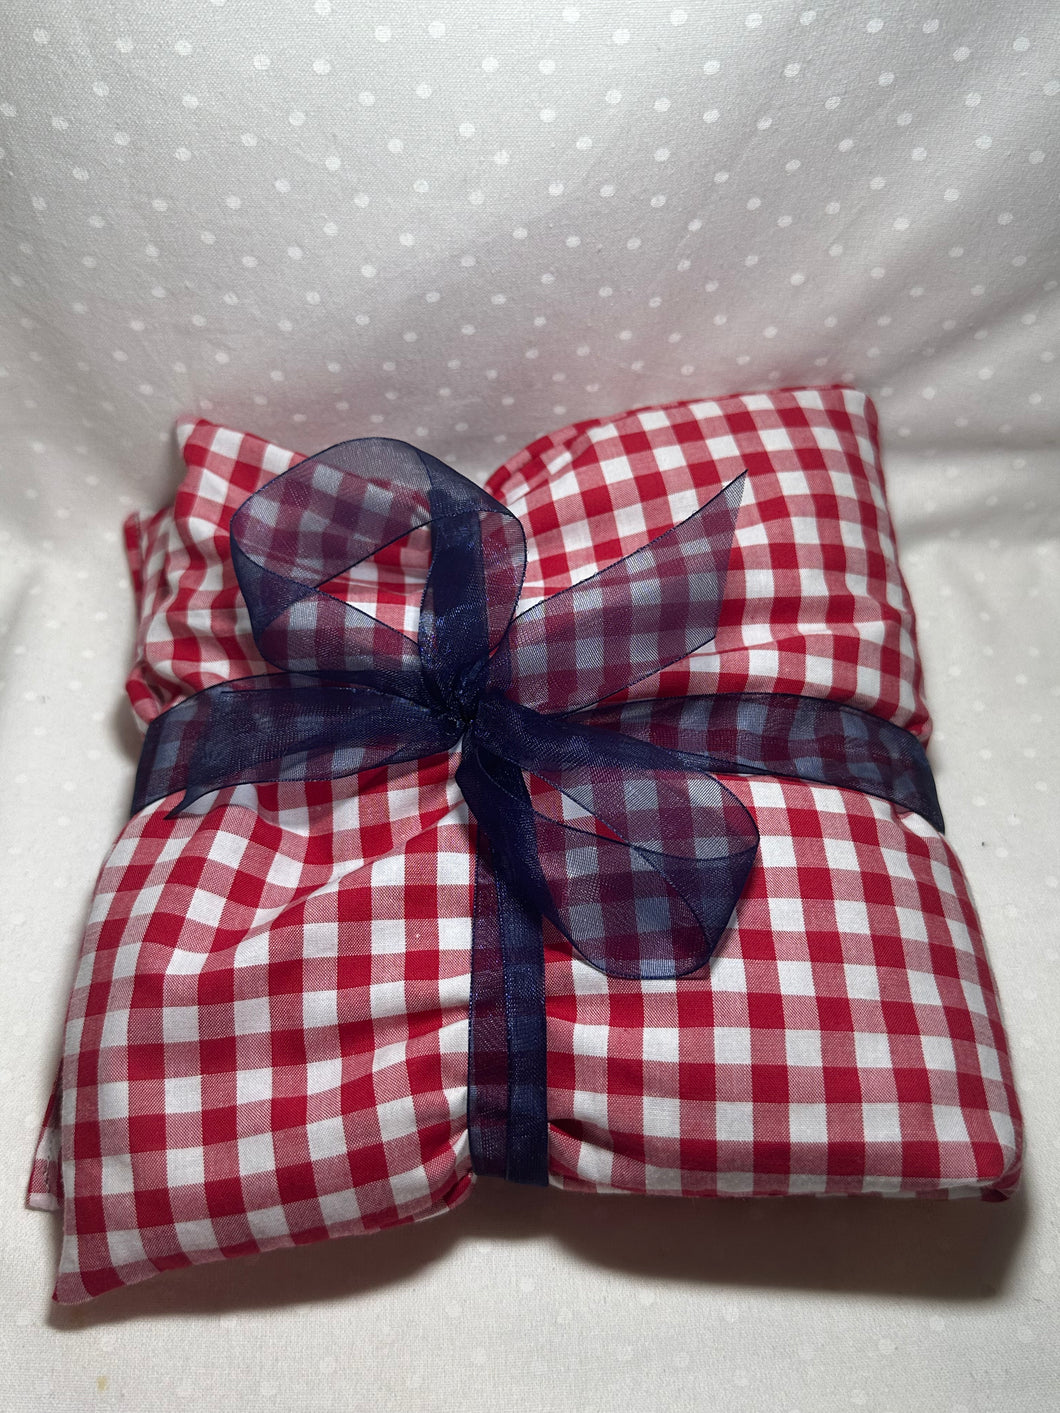 Wheat bag 1kg - Red Gingham